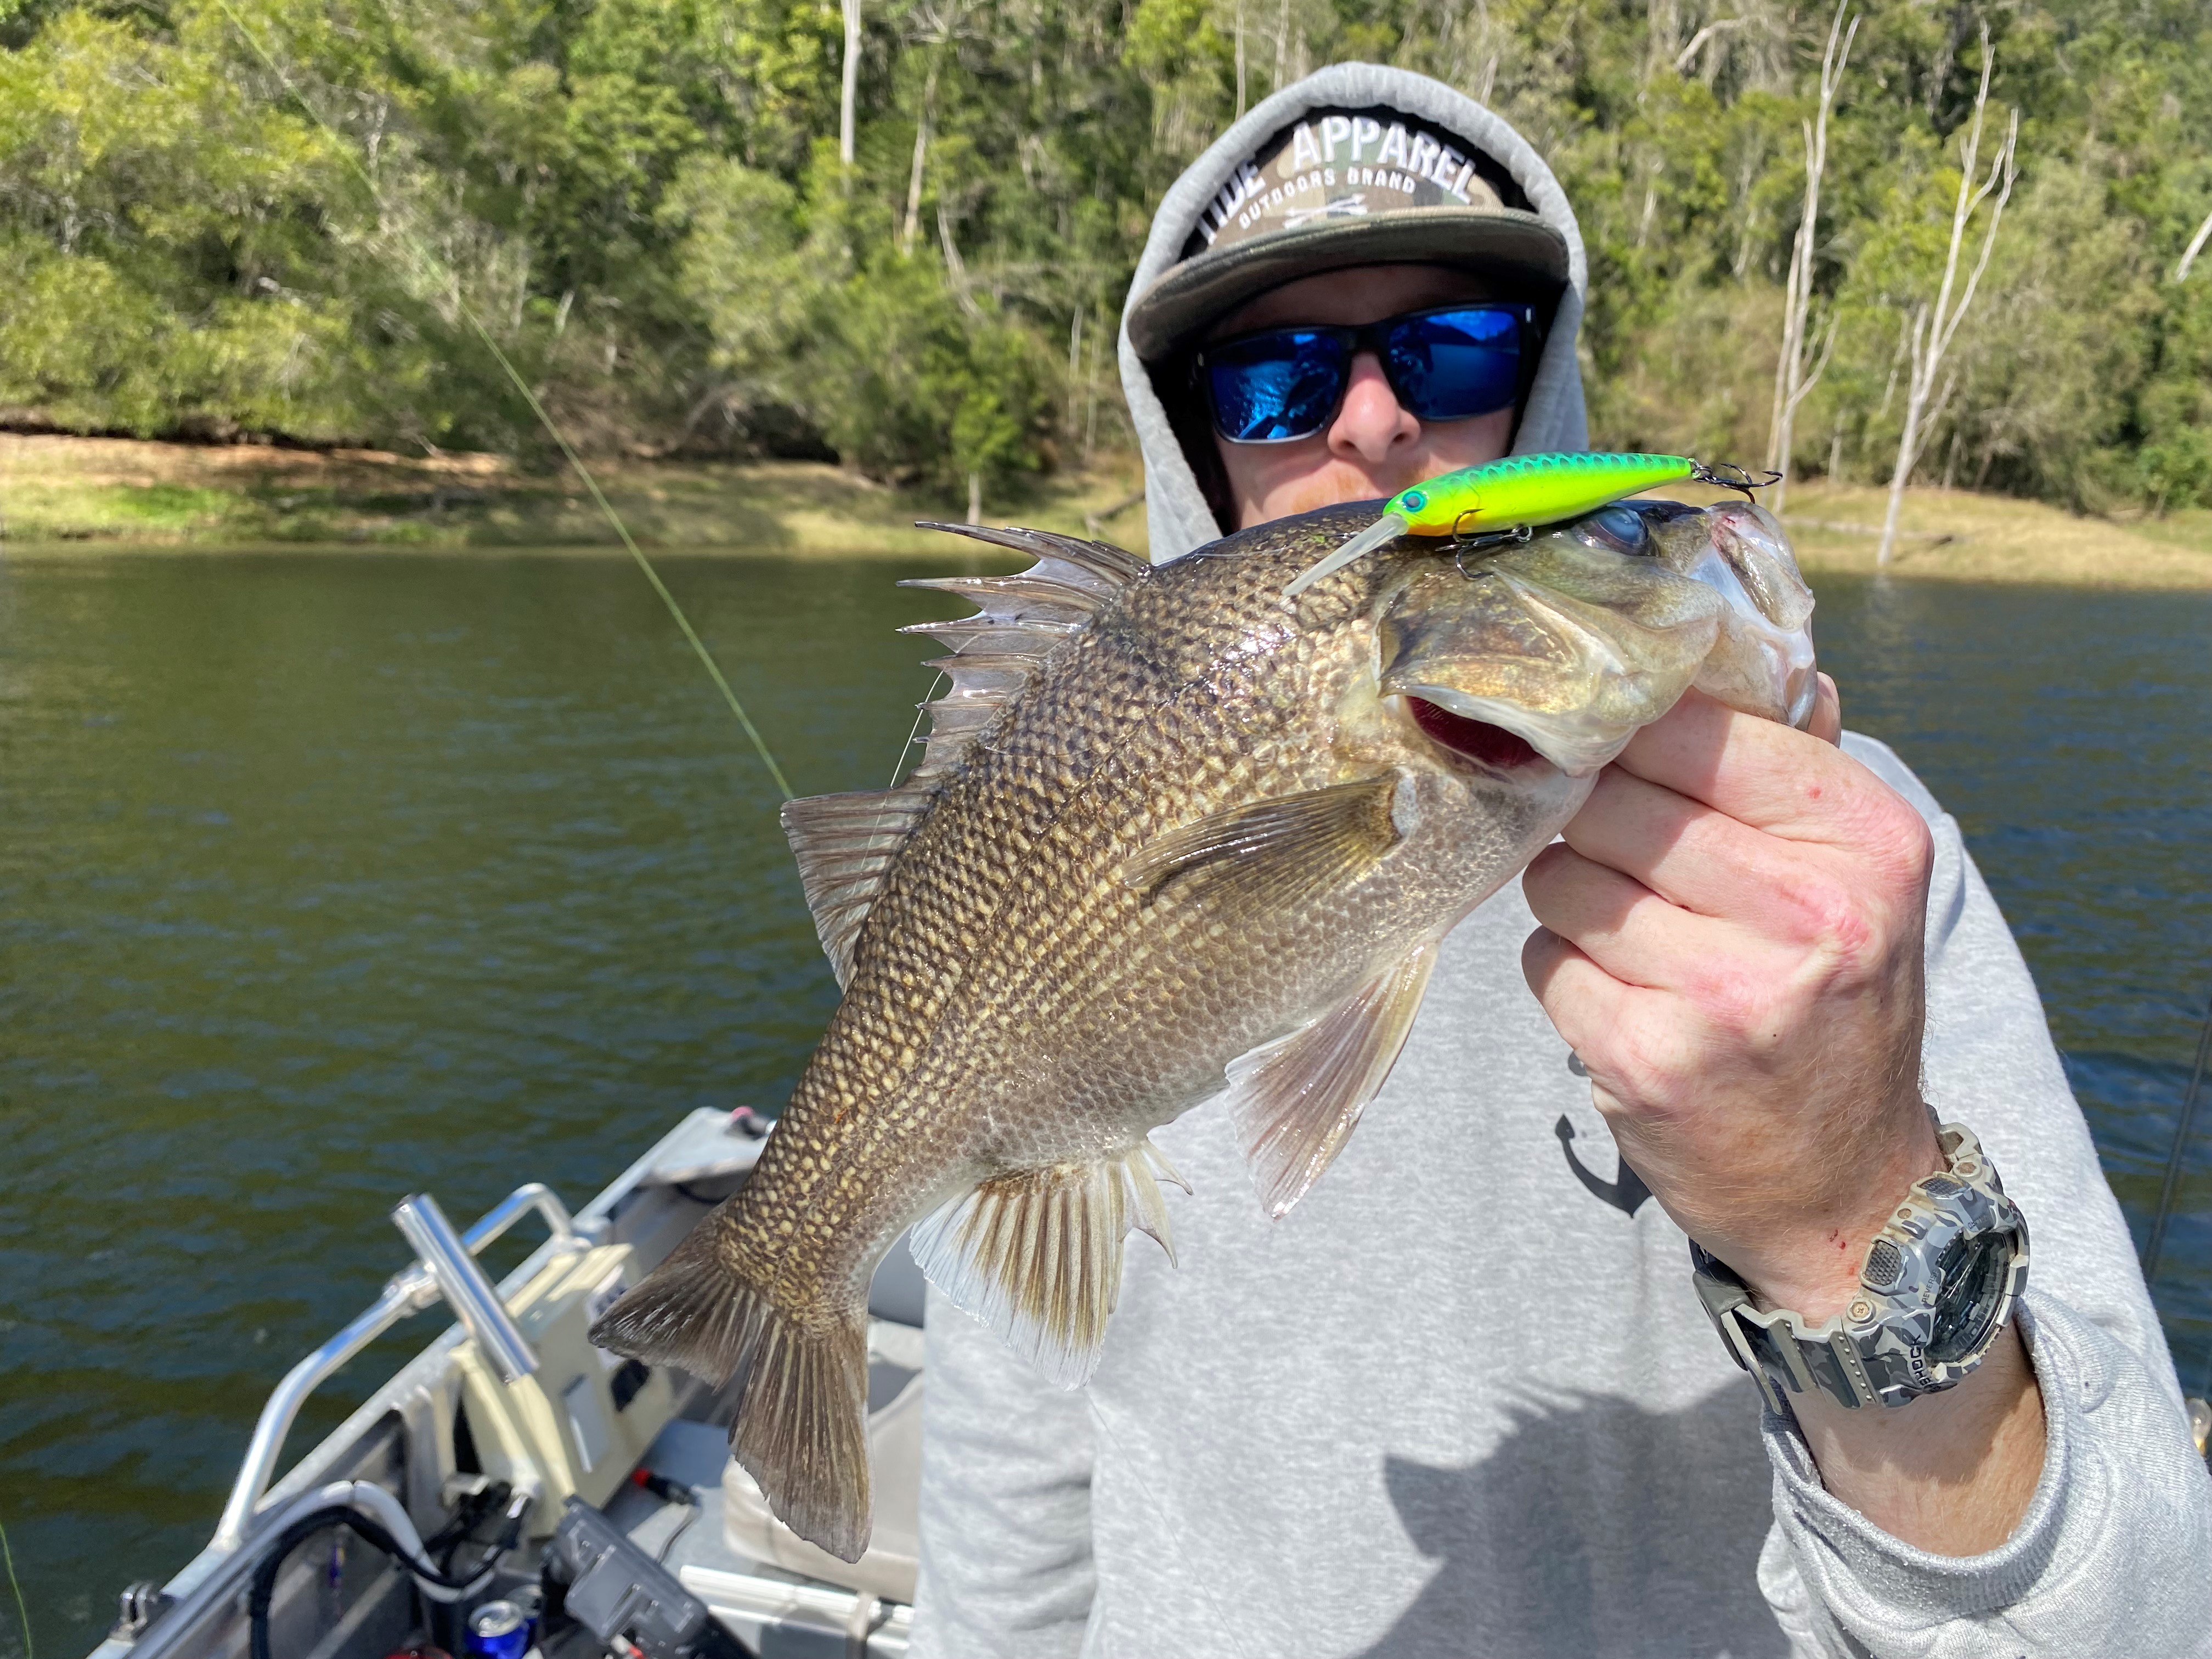 https://www.bcf.com.au/on/demandware.static/-/Library-Sites-bcf-shared-library/default/dw84a2c01f/images/blog/fishing/how-to/bass-fishing-lures/Best%20Lures%20for%20Catching%20Bass%20-%20Diver.jpg